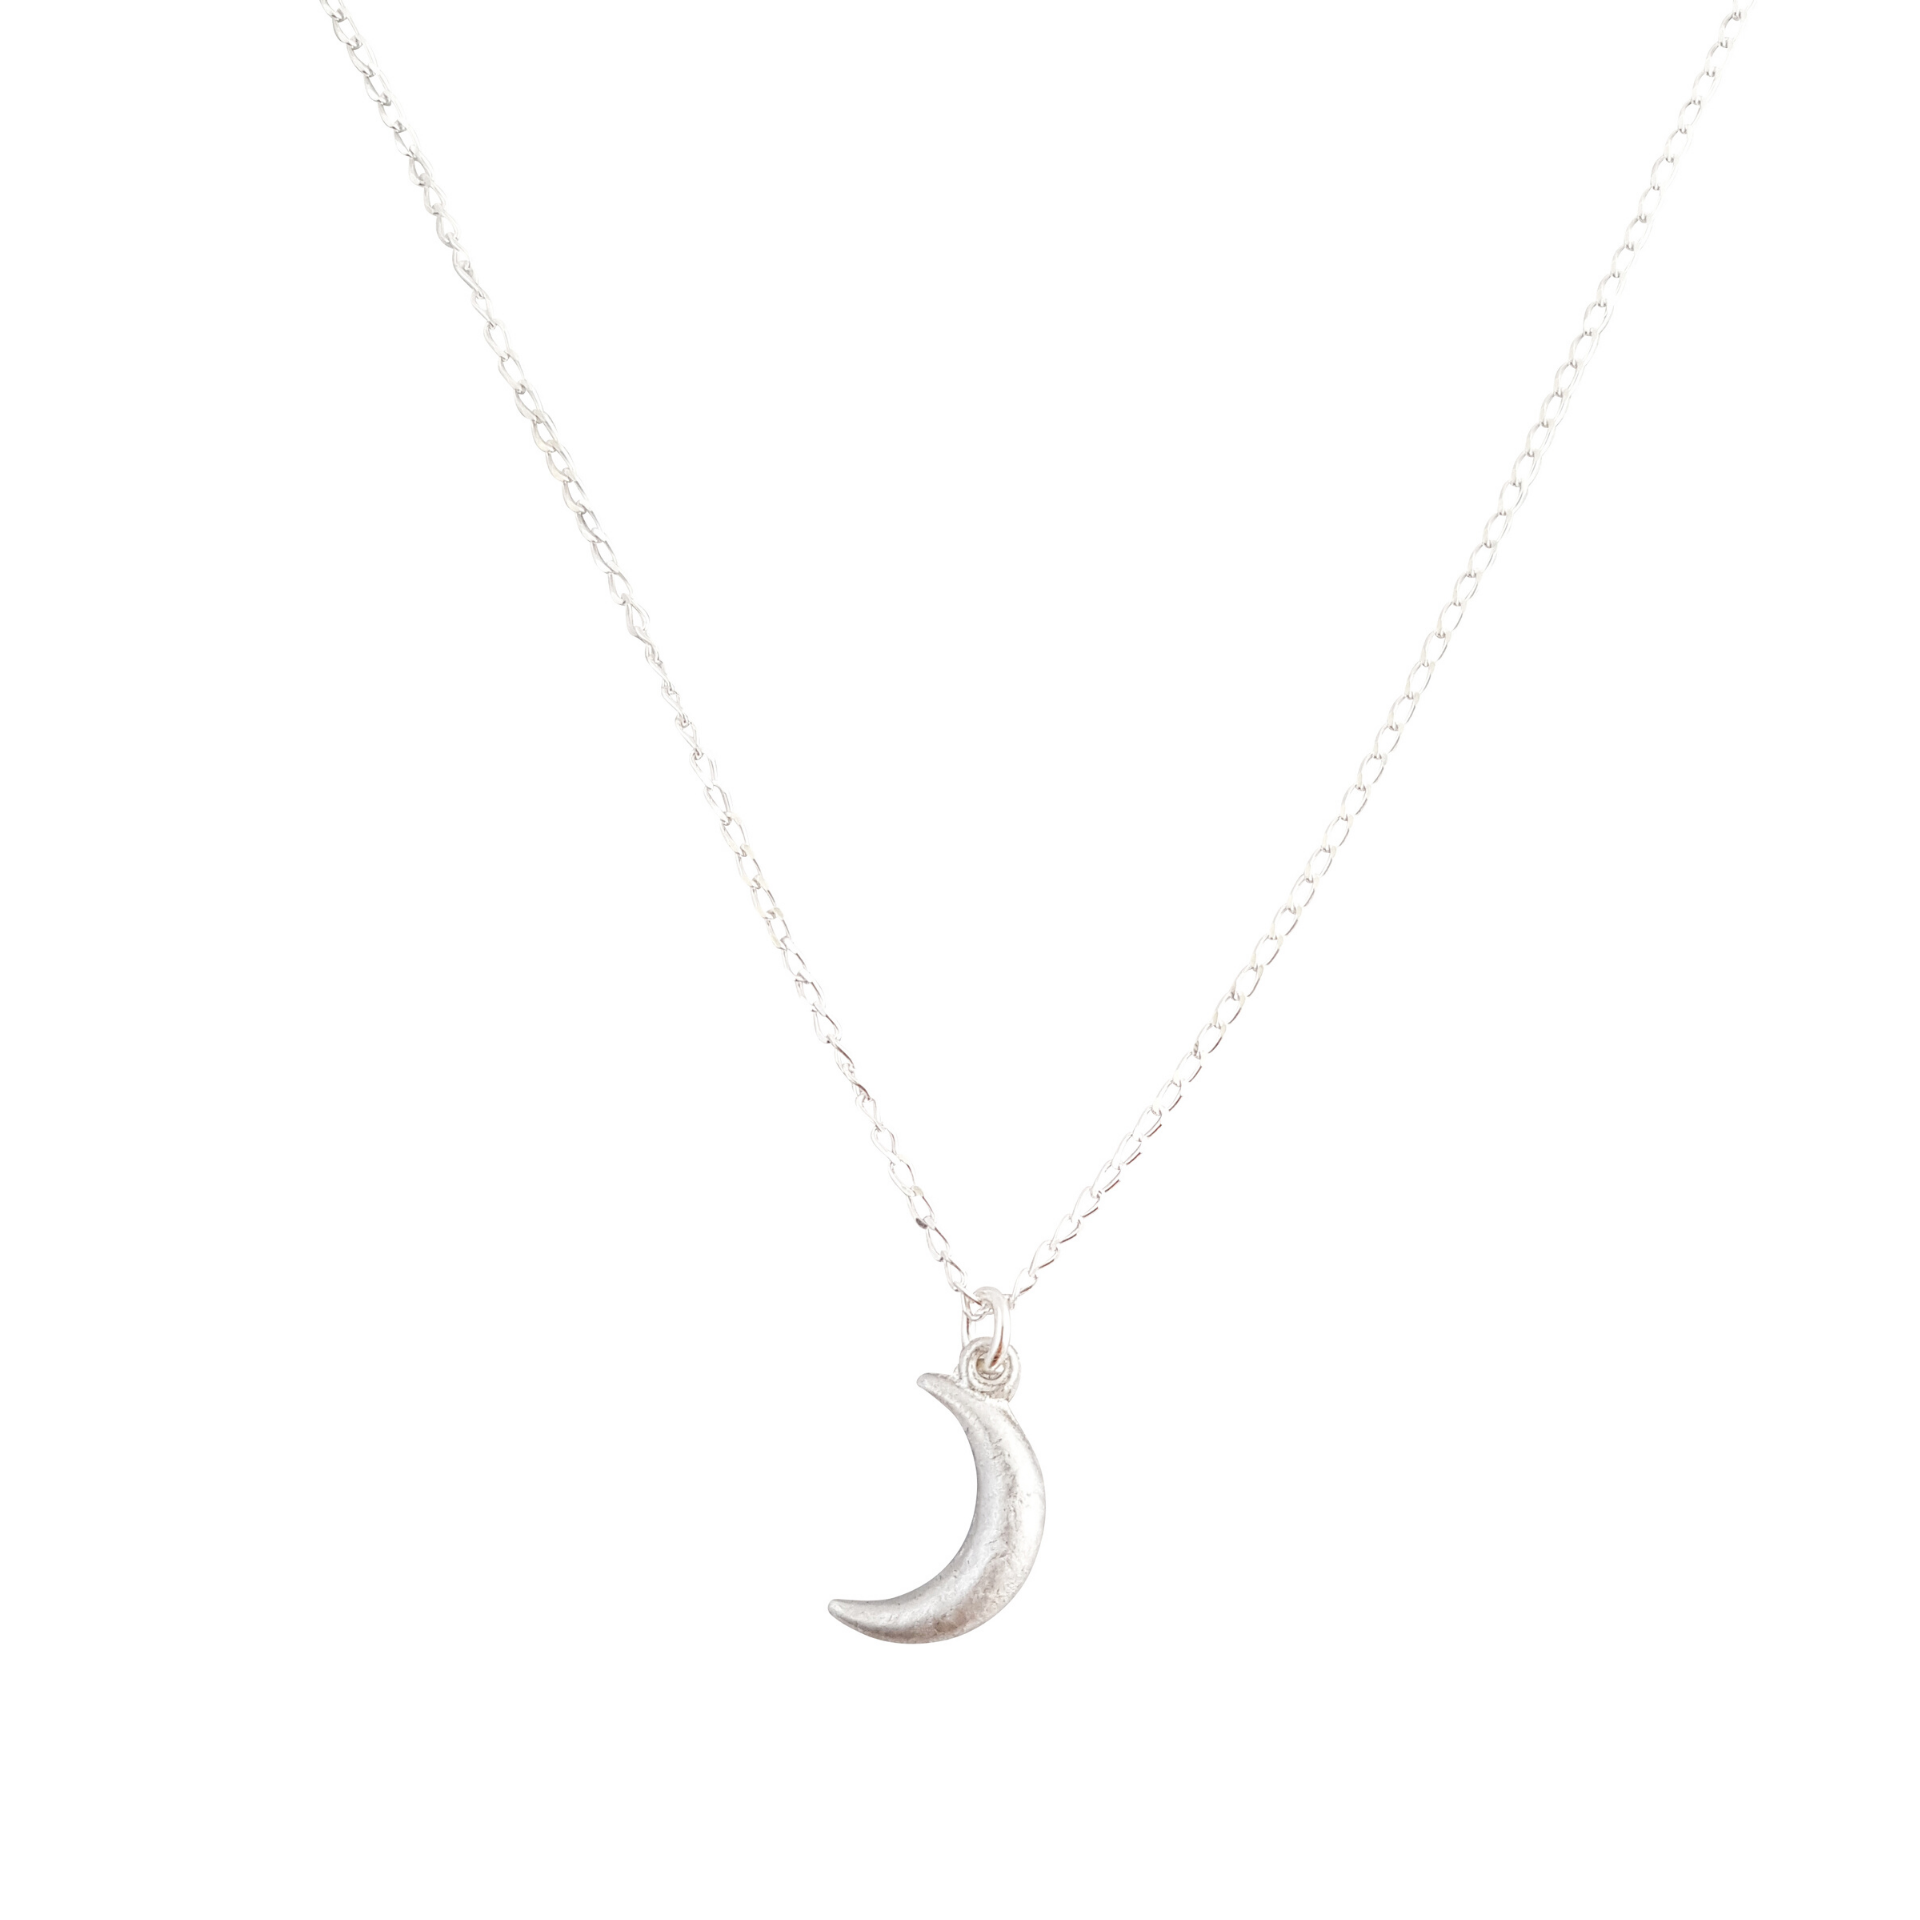 LOVEbomb Crescent Moon Pendant on Sterling Silver Chain